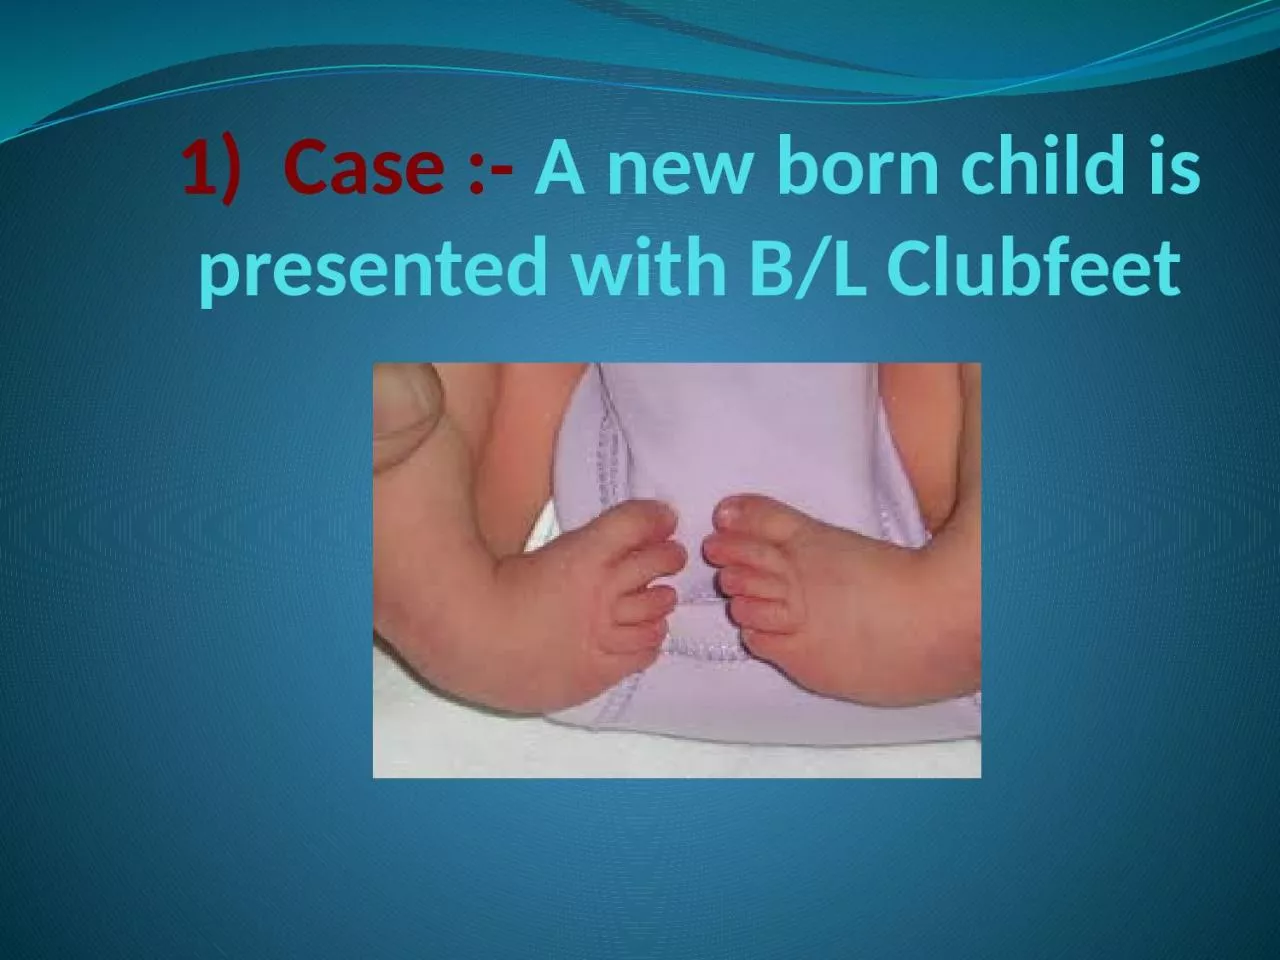 1)  Case :-  A new born child is presented with B/L Clubfeet